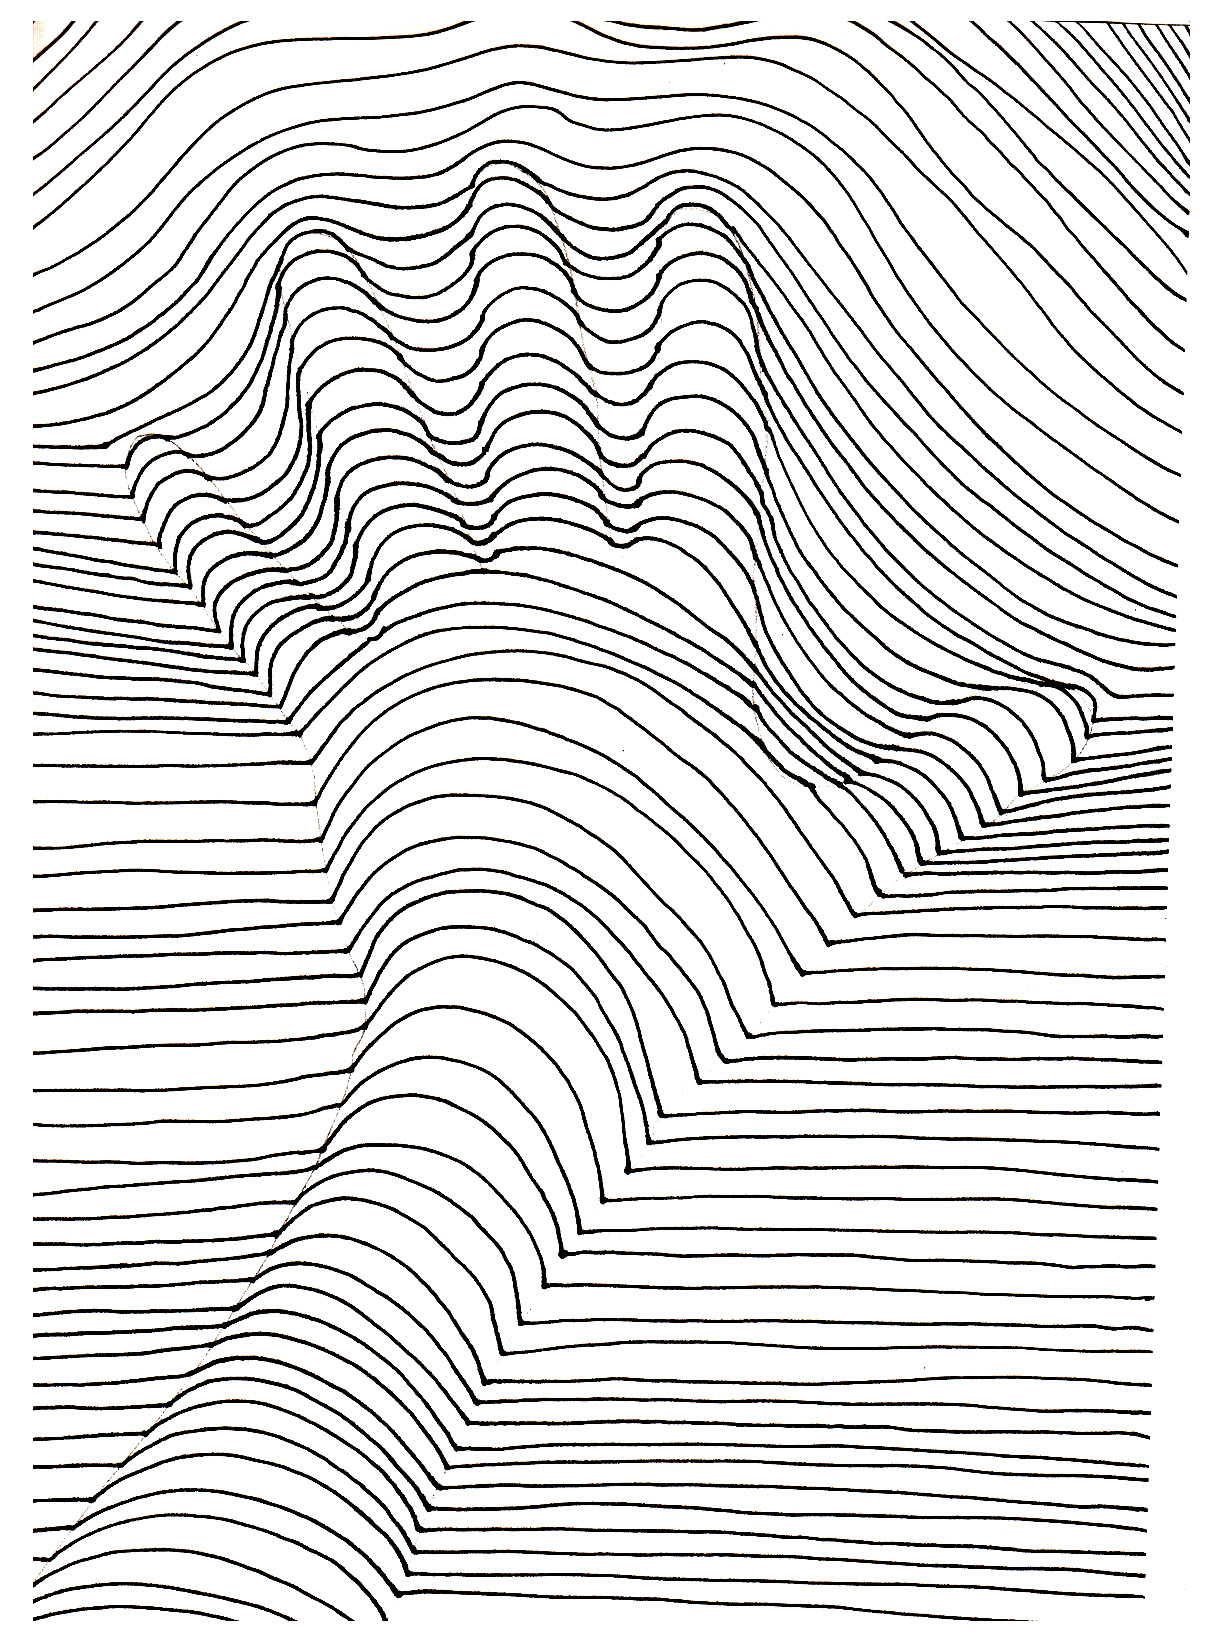 free optical illusion coloring pages to print